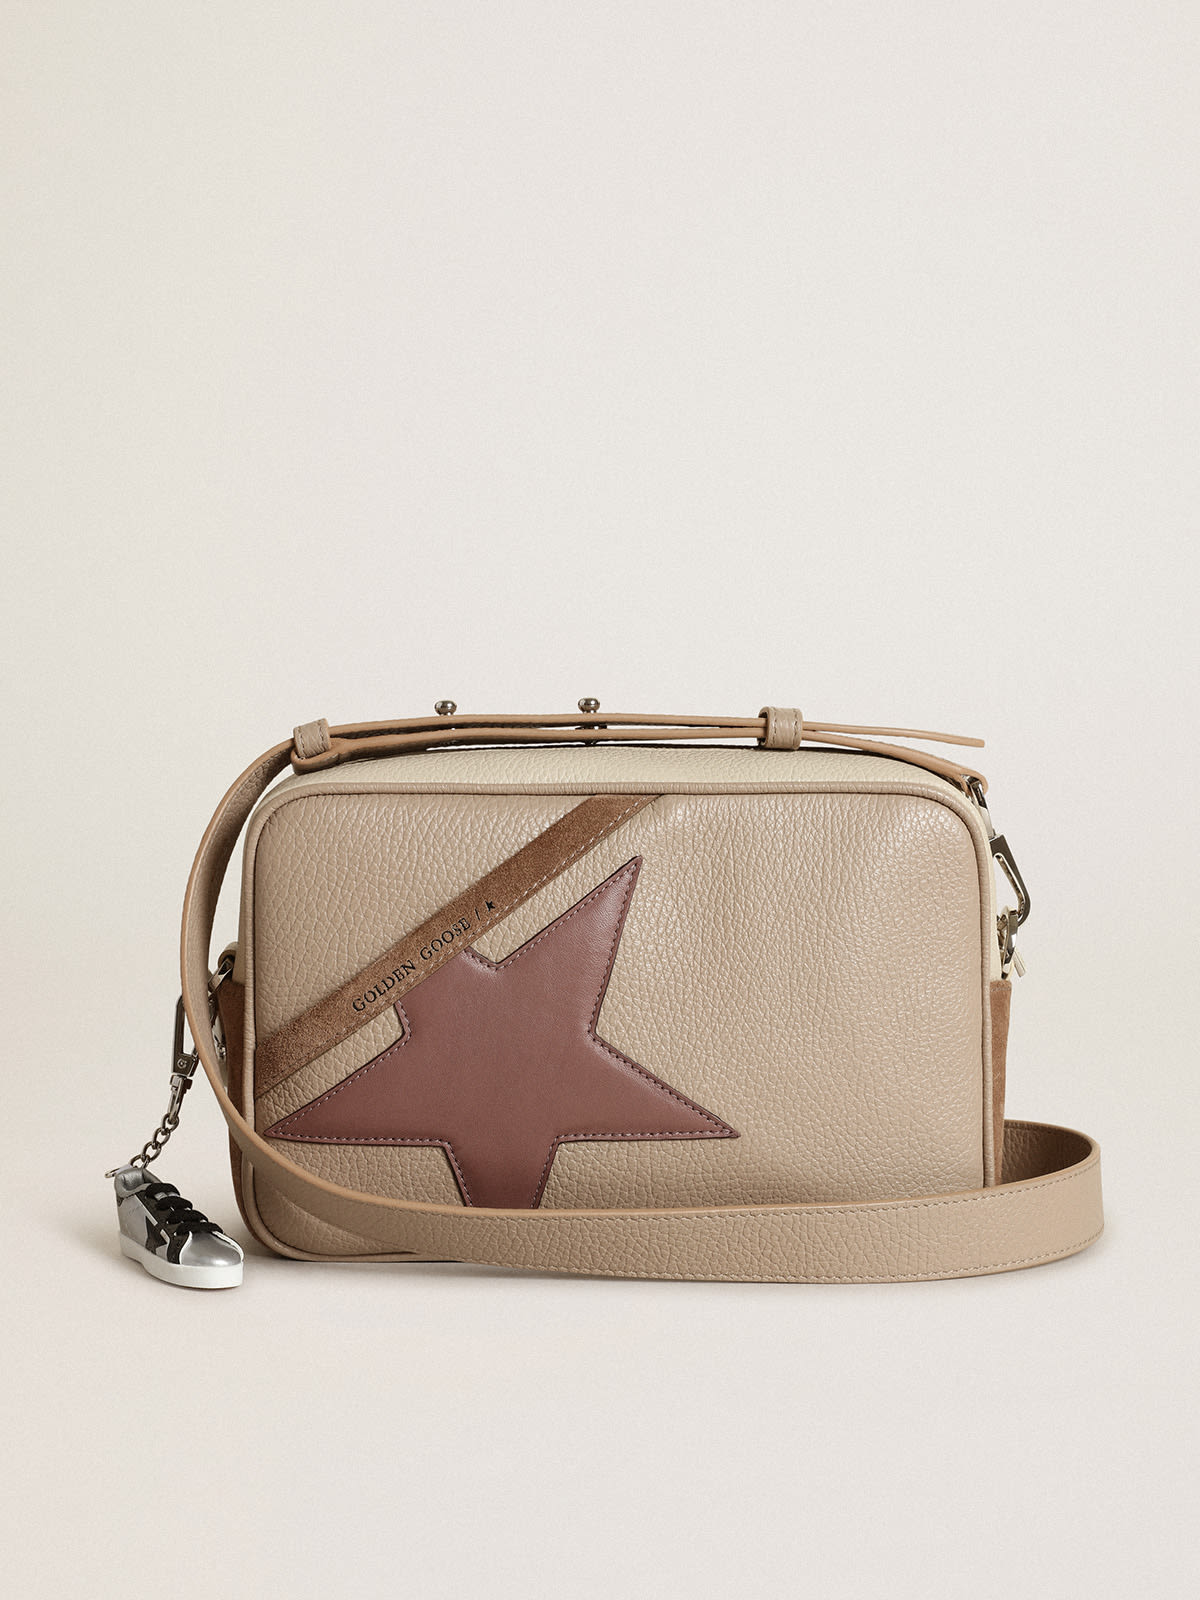 Golden Goose - Large Star Bag in off-white hammered leather and cappuccino-colored suede with purple leather star in 